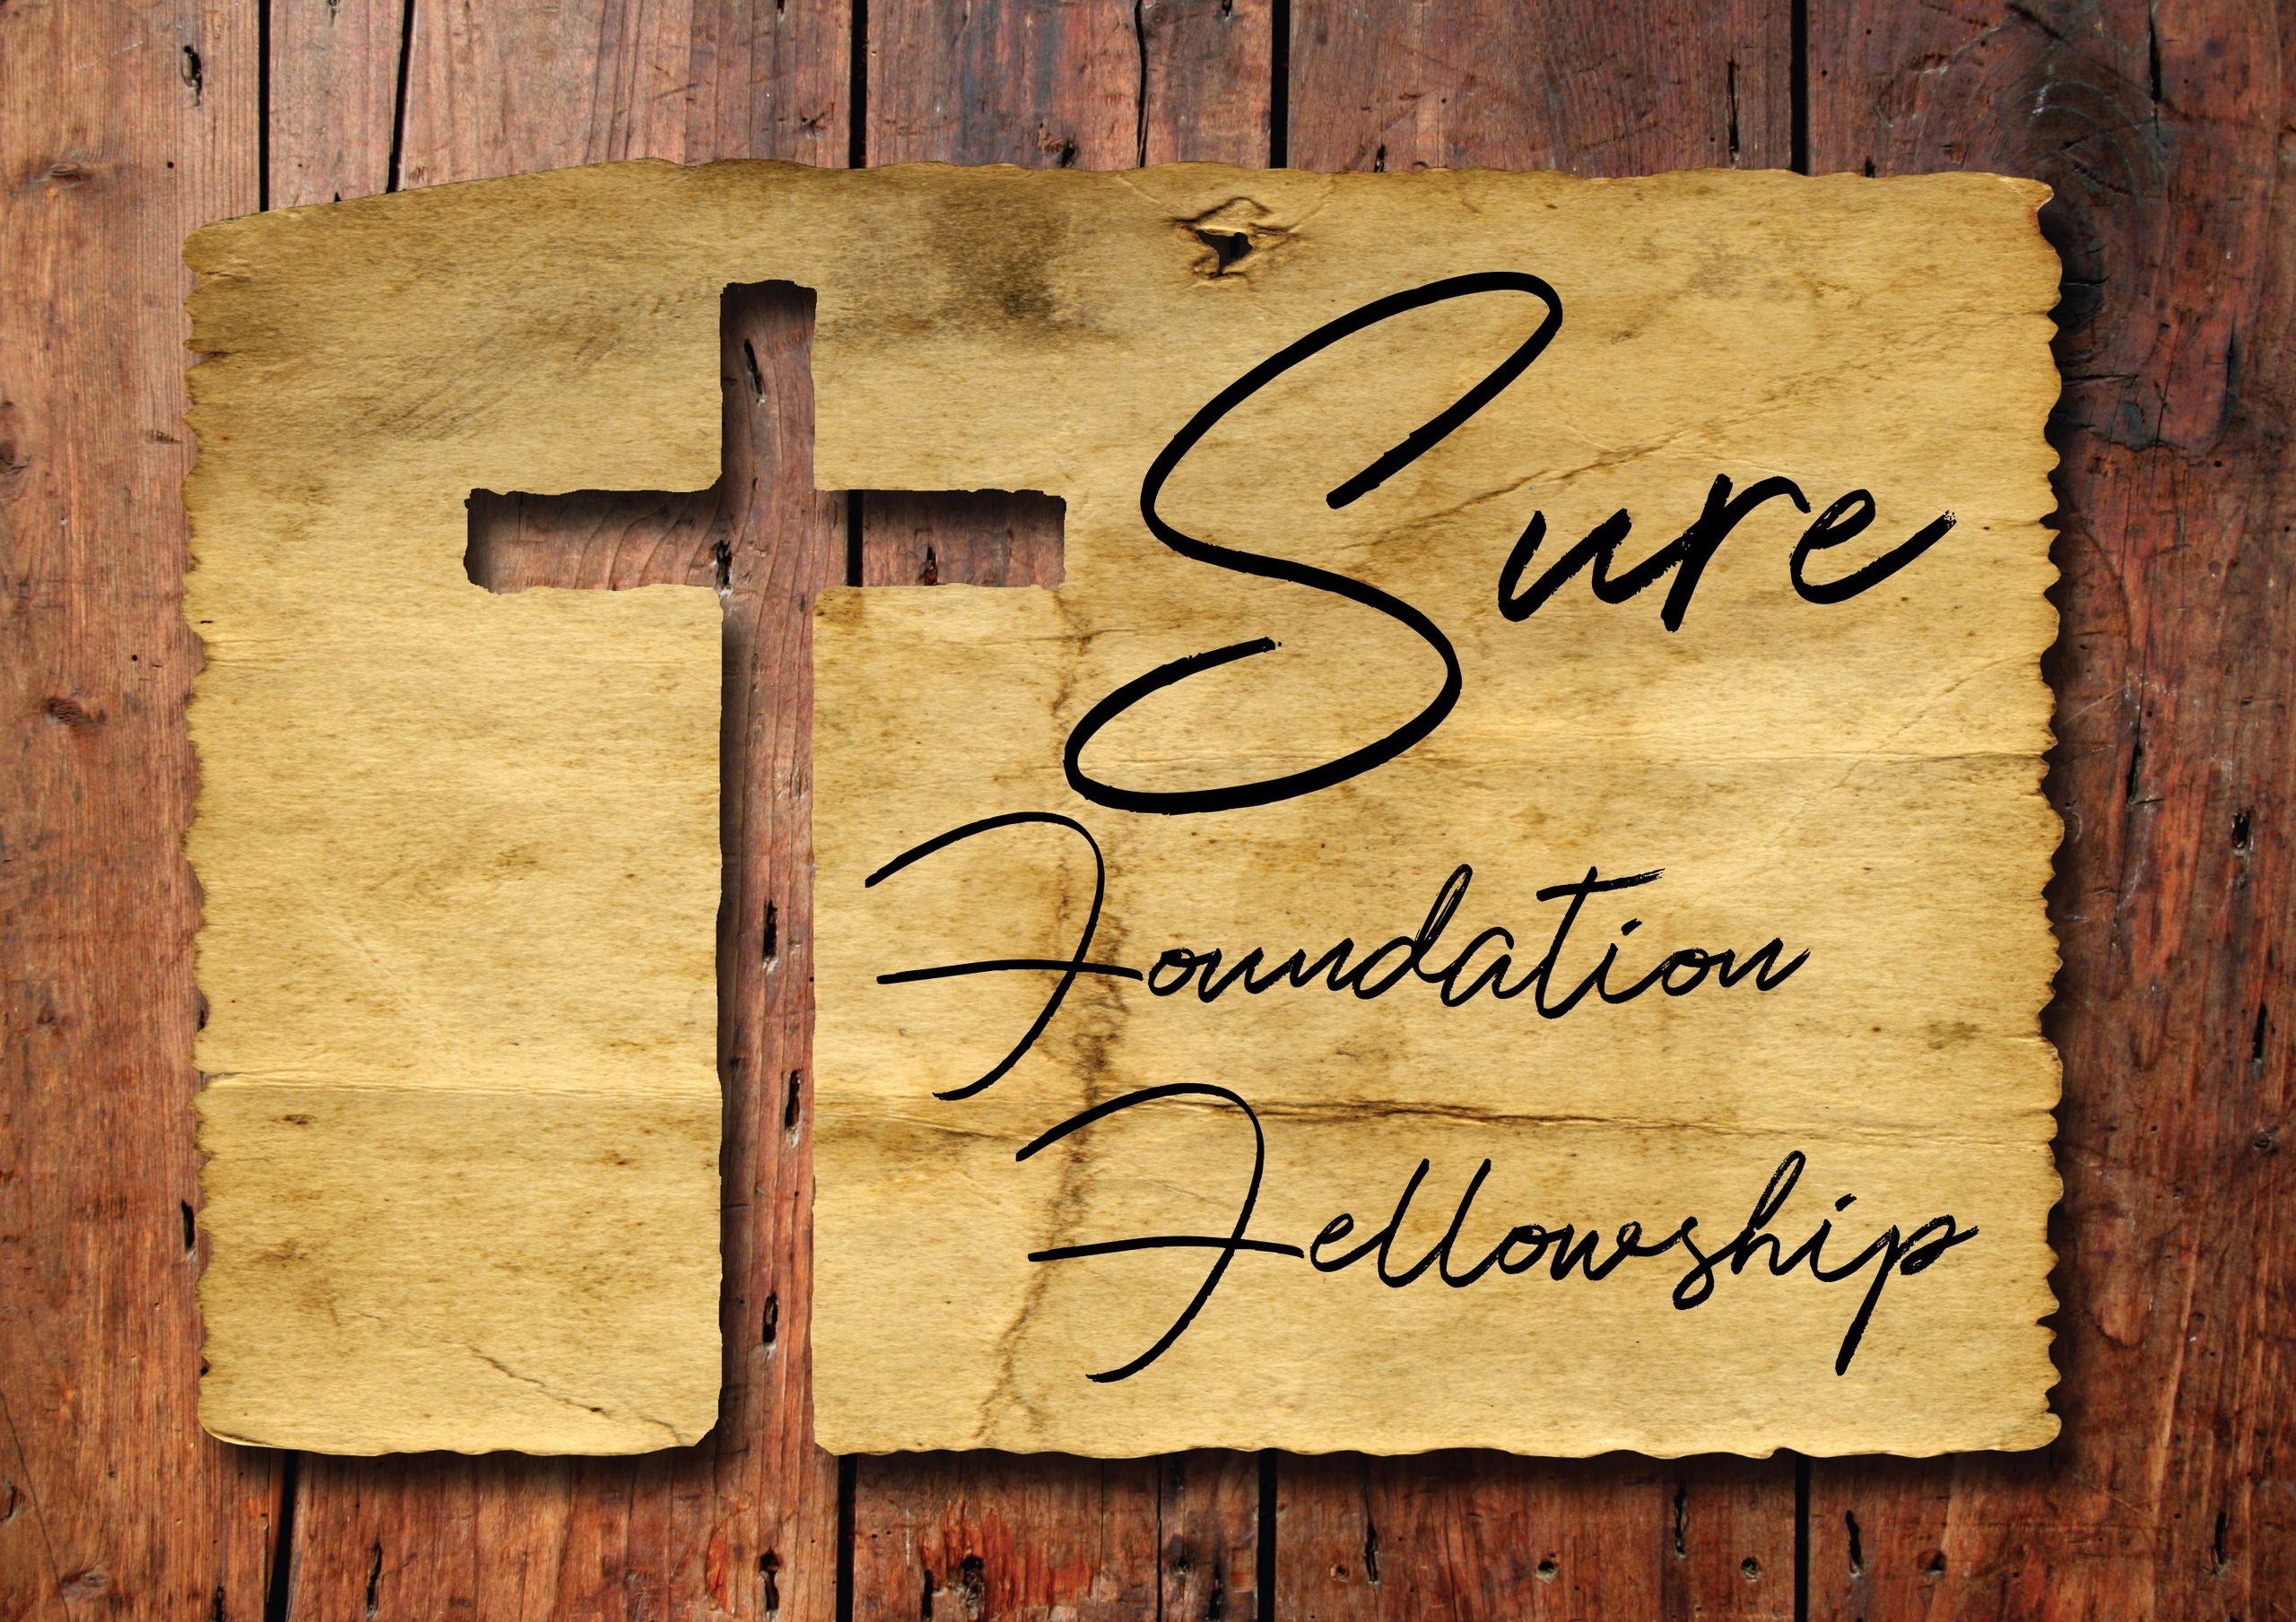 Sure Foundation Fellowship - Building on the History of Worship in Verdi, NV